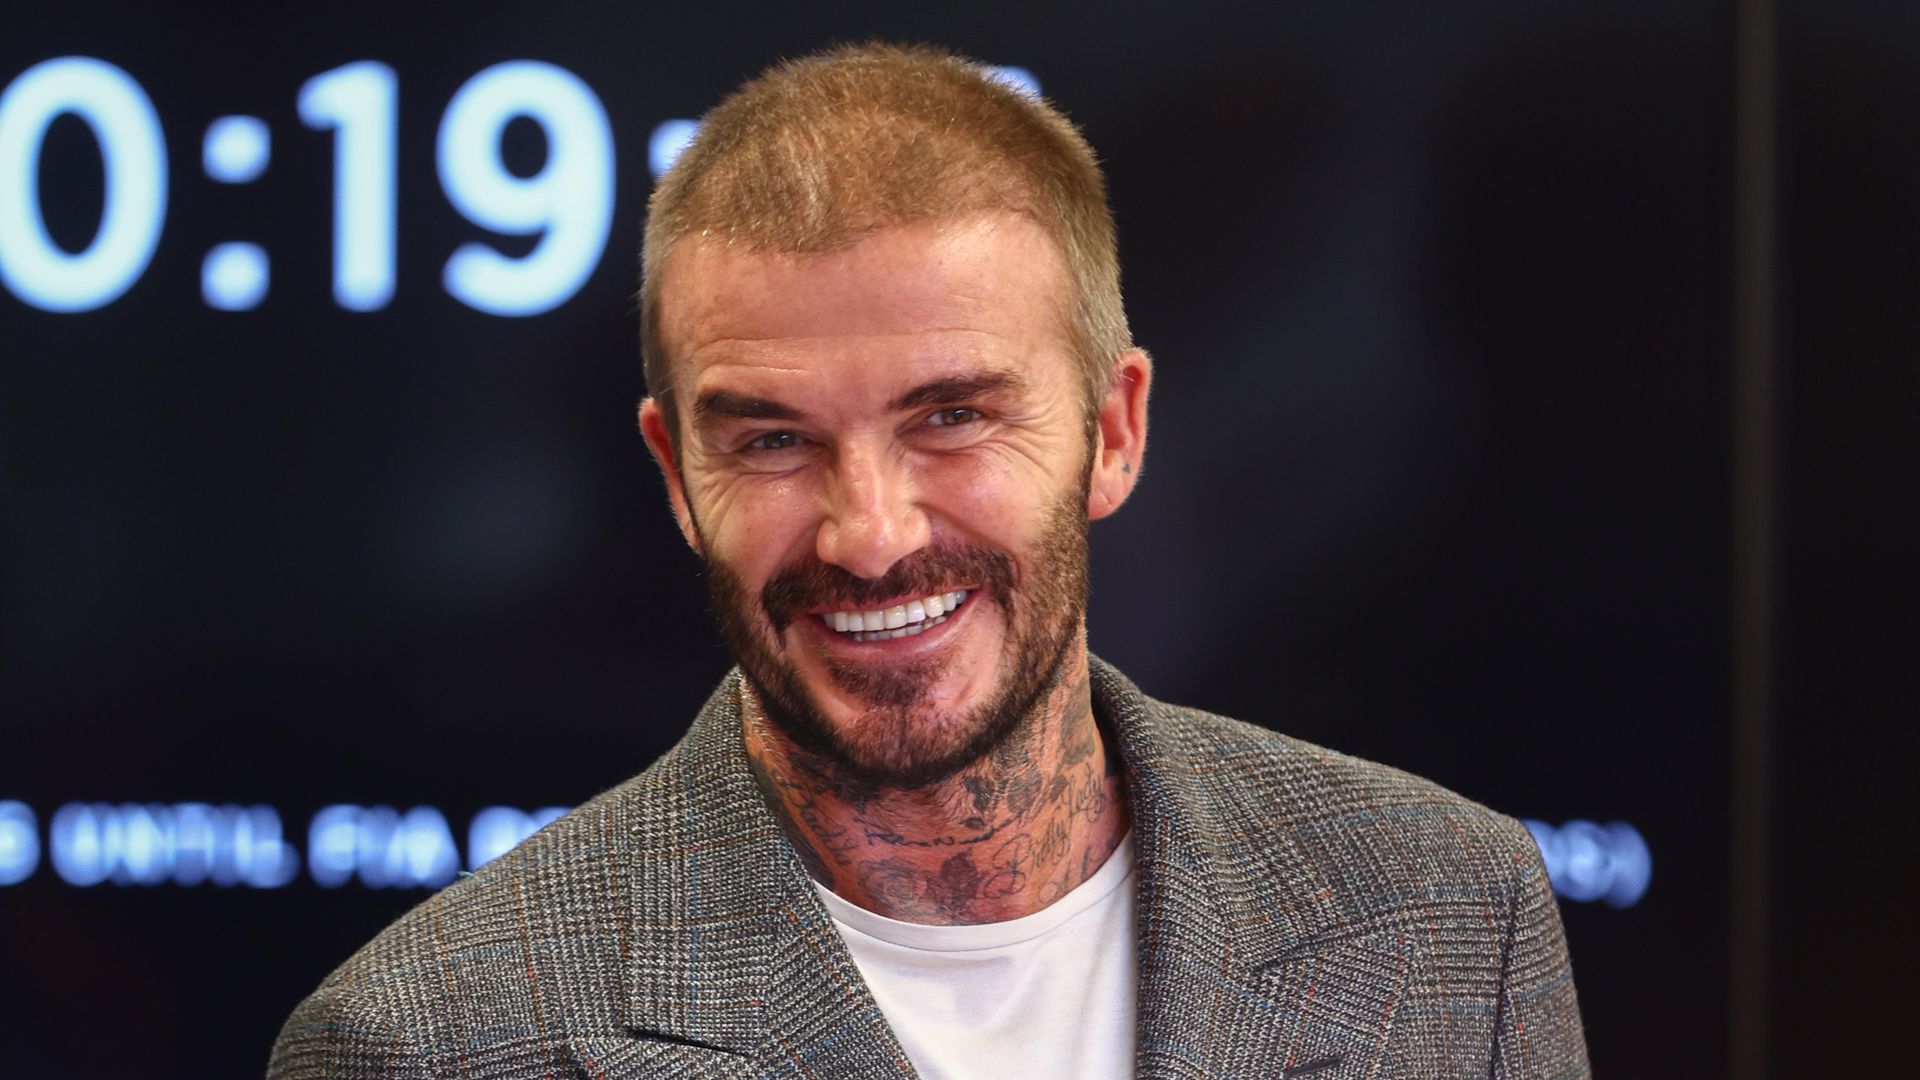 David Beckham Poses for Selfies with Fans - Fashion One News